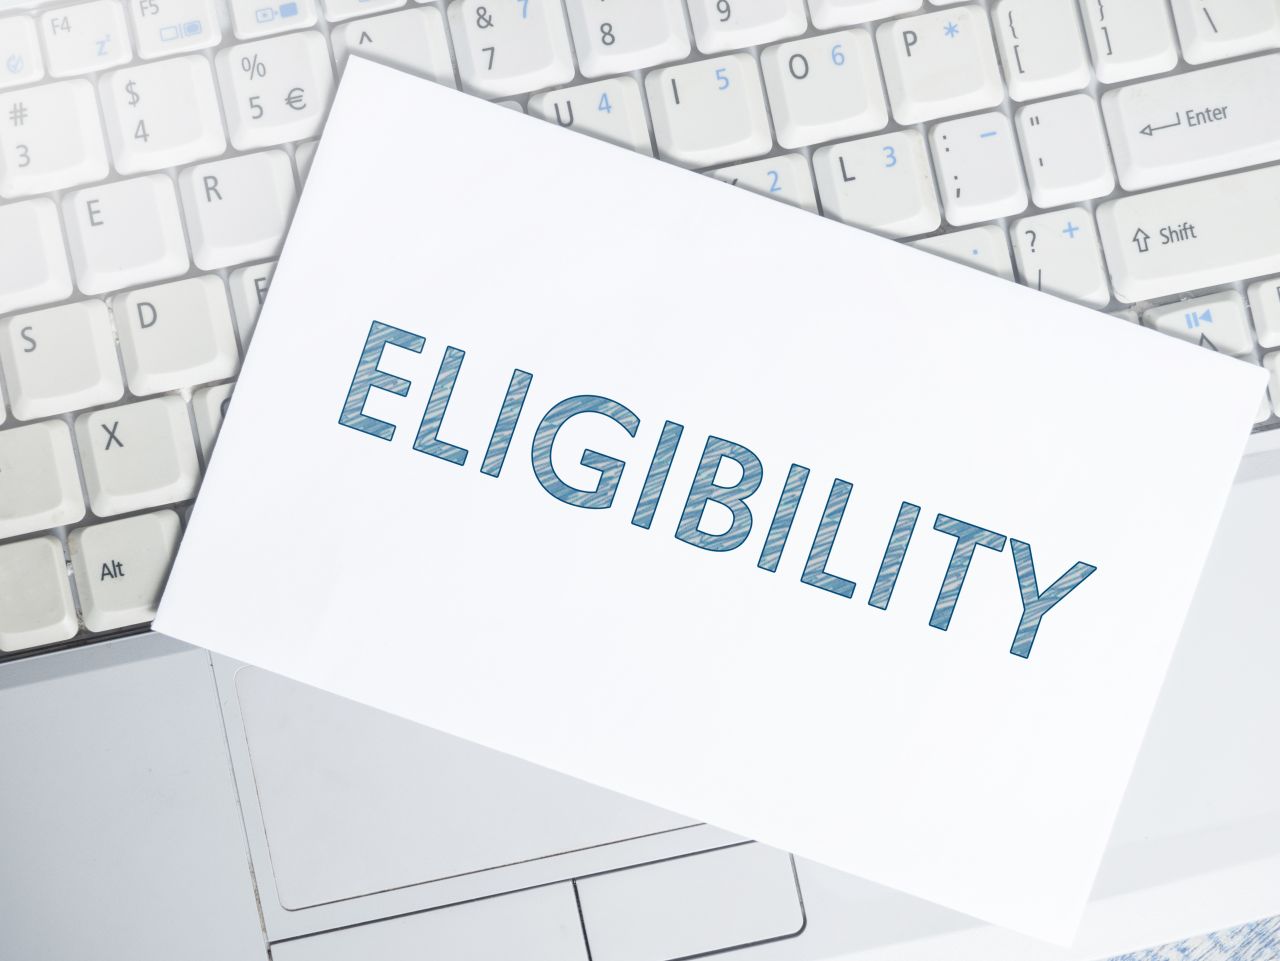 eligibility card on top of computer keyboard